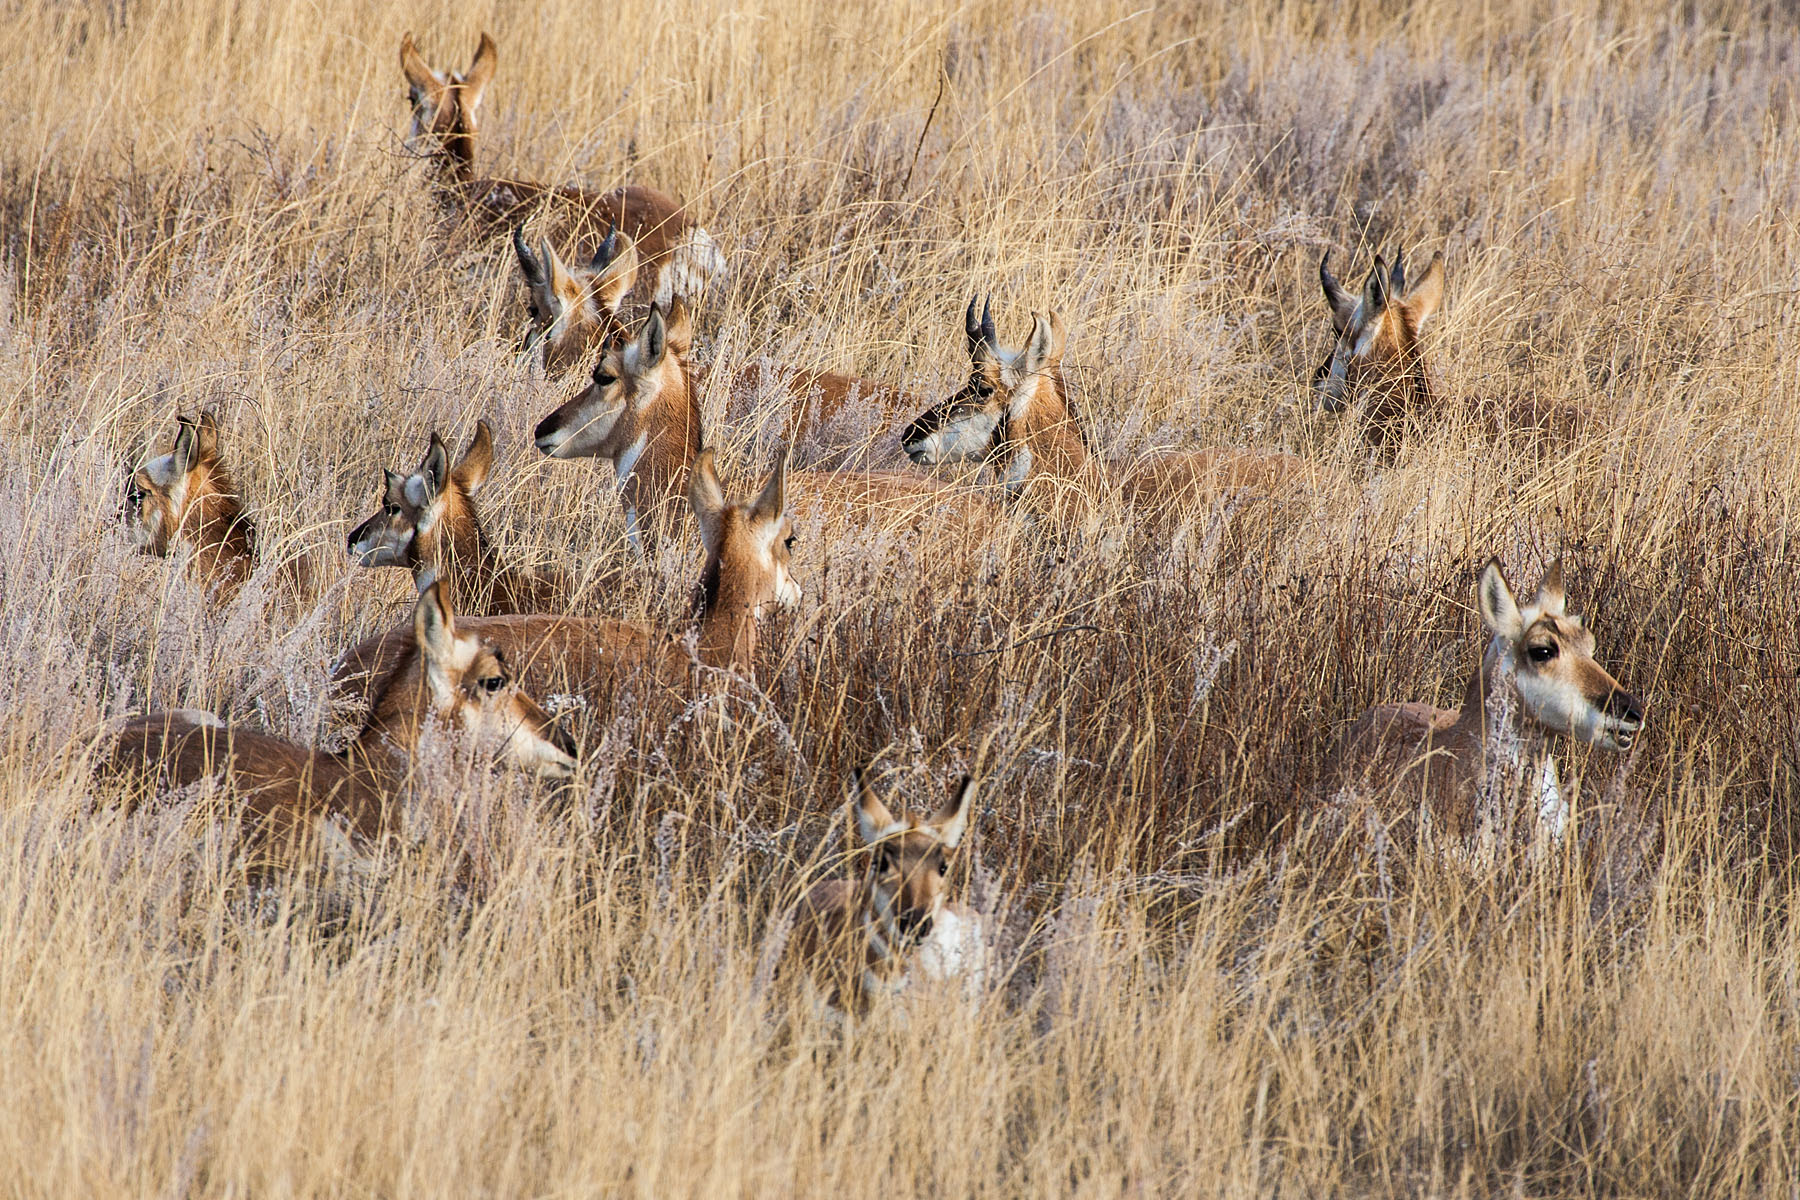 Pronghorns among the grass, Custer State Park, SD.  Click for next photo.